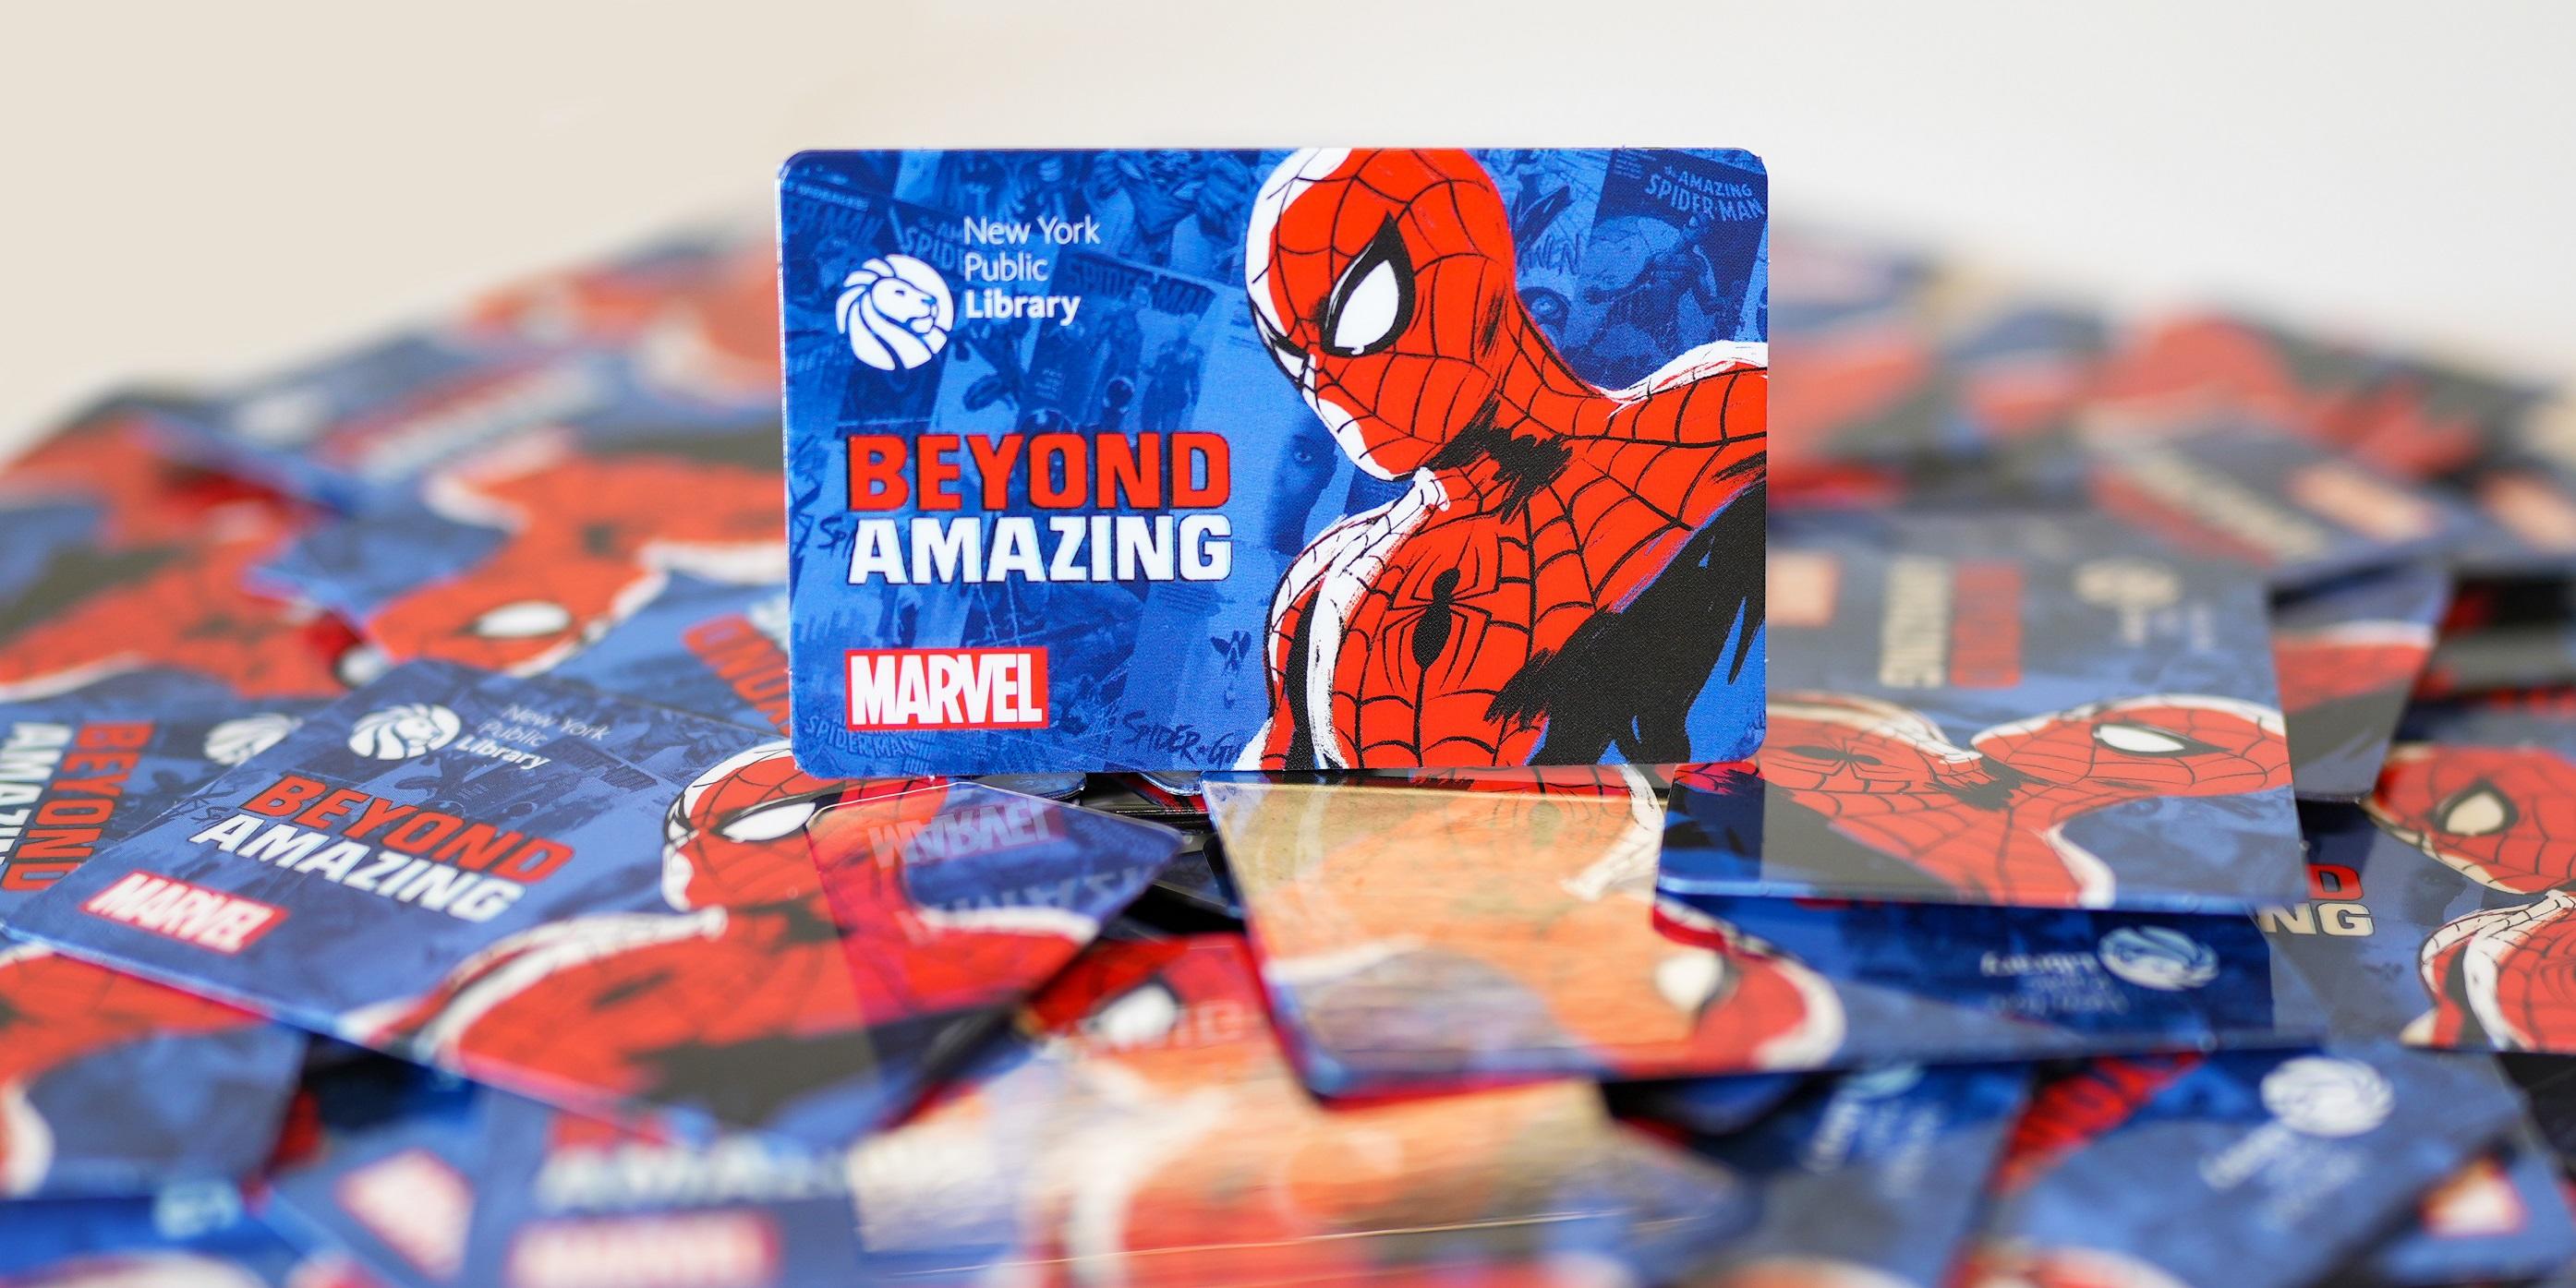 spider-man-library-card-courtesy-of-new-york-public-library.jpg